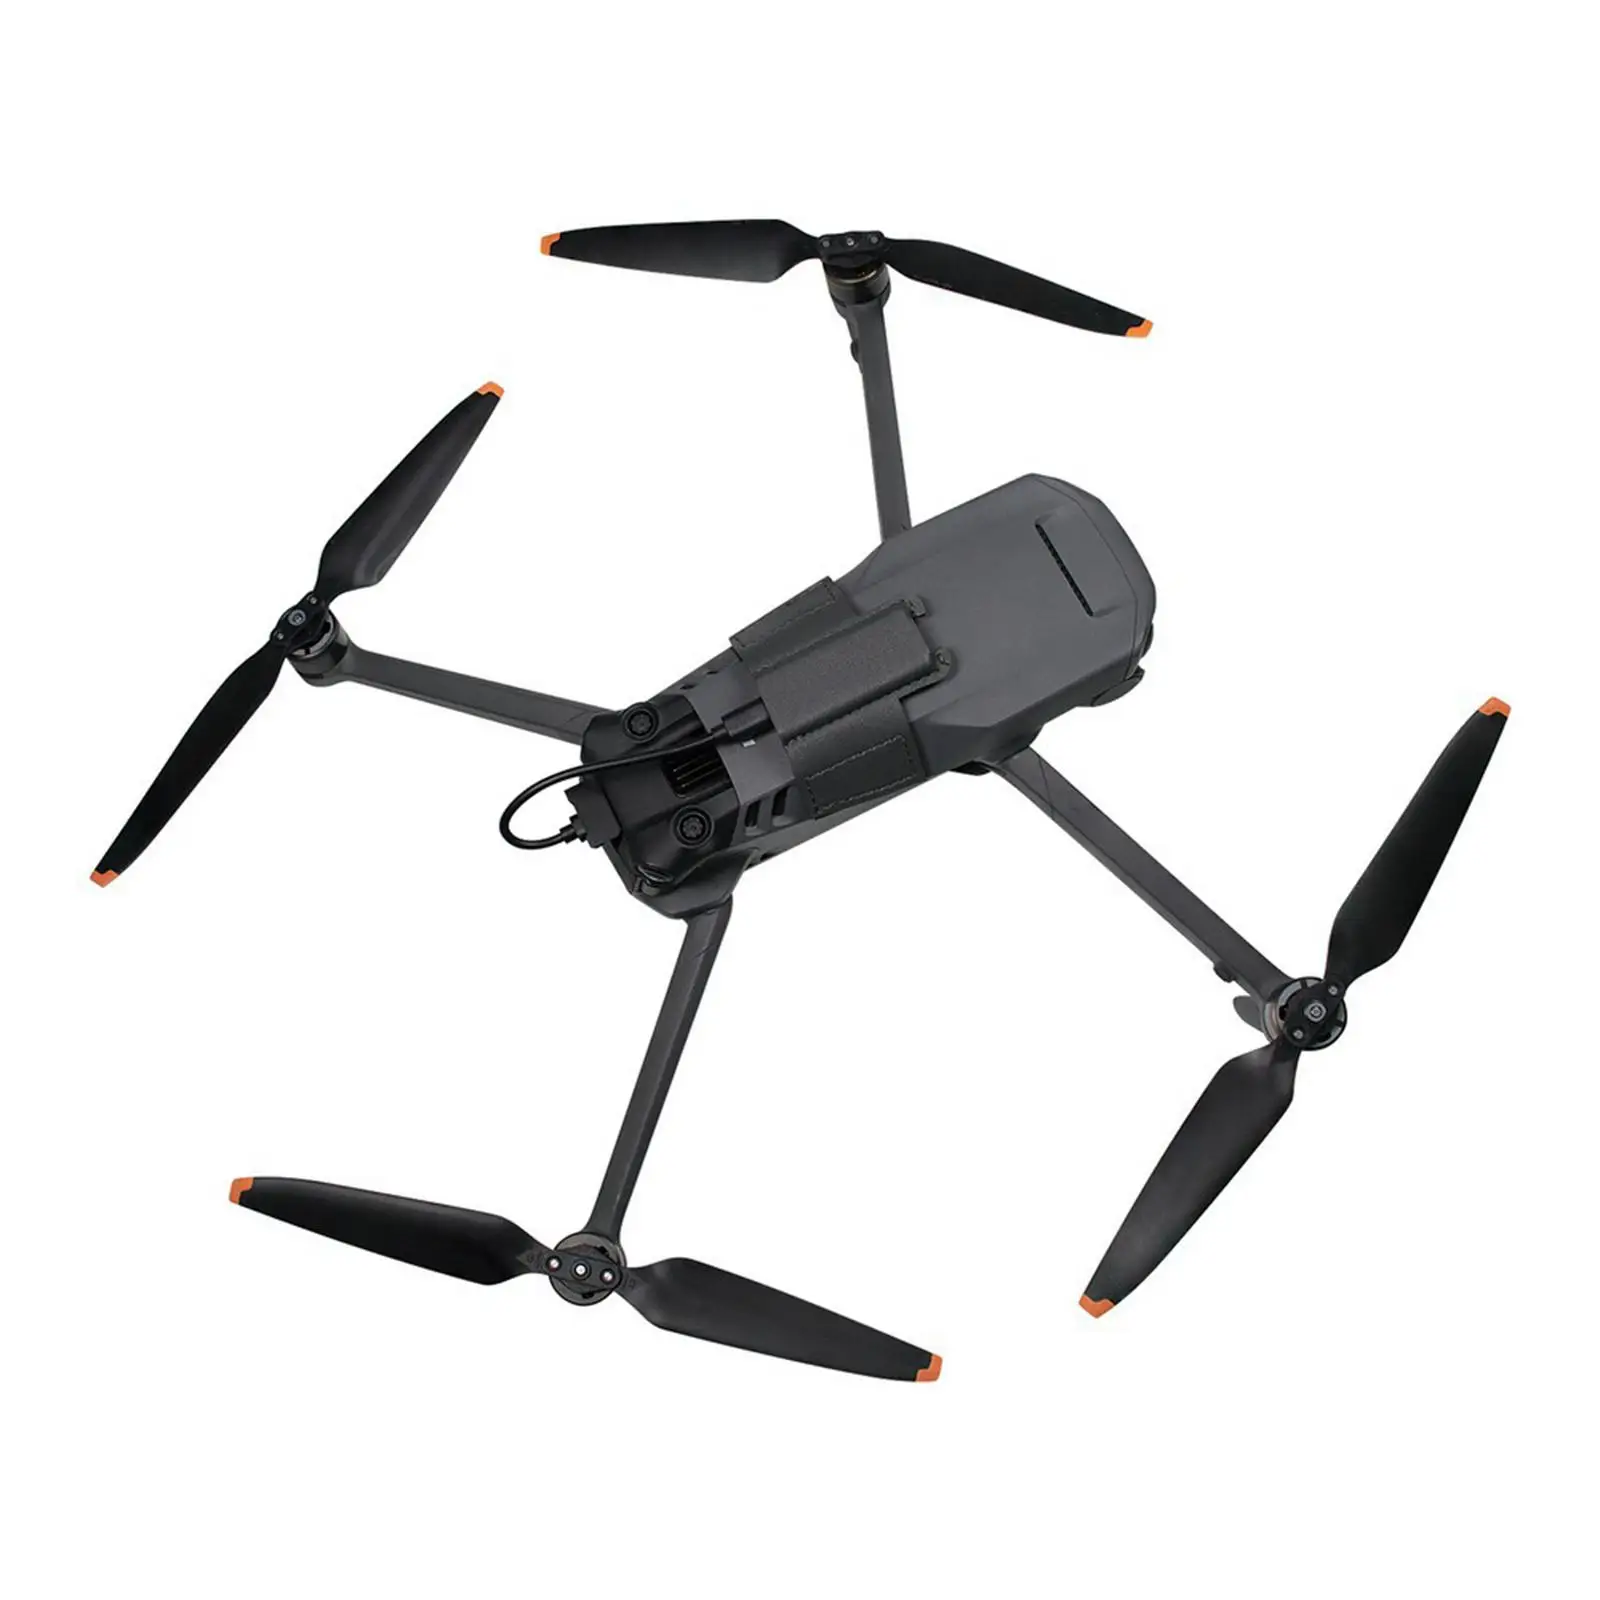 4G Module Installation Kit PU Leather Wear Resistant Cellular Module Fixed Kit Lightweight Drone Accessories for 3 Pro Drone